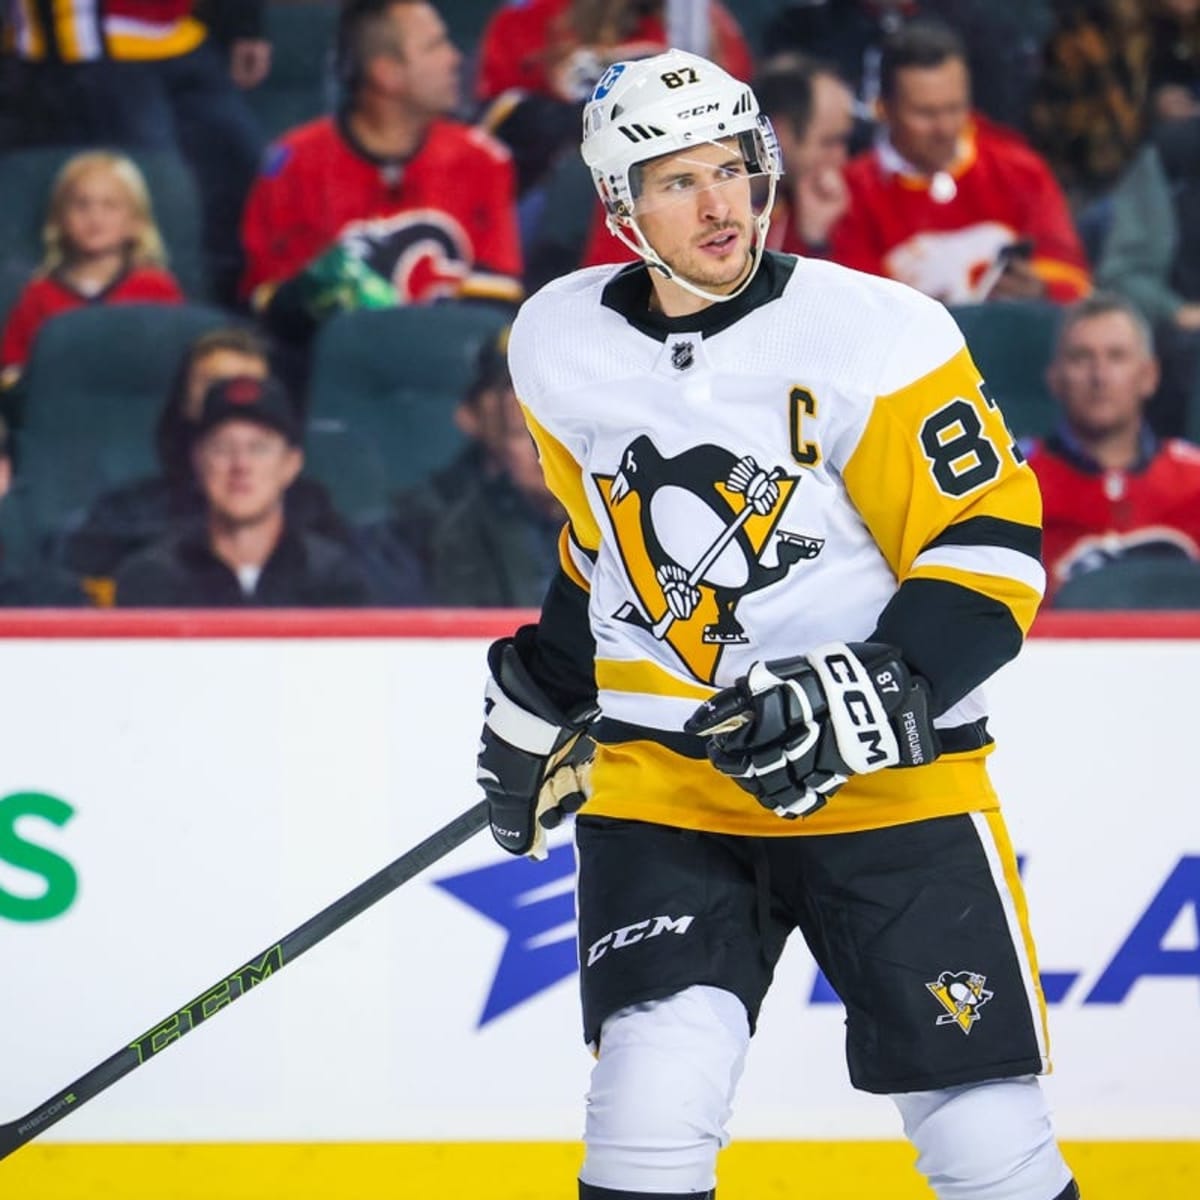 watch nhl penguins game online free